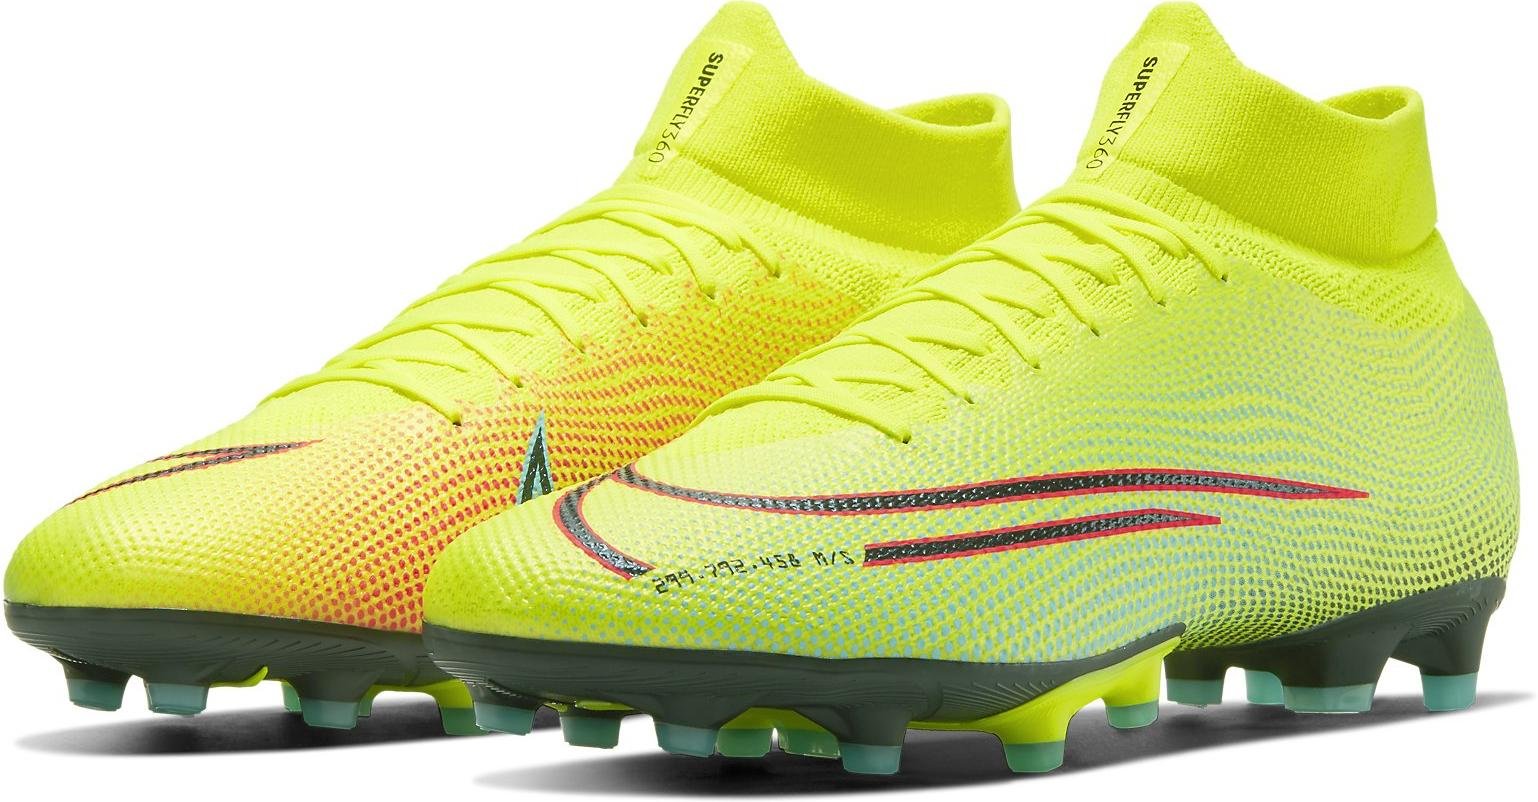 Buy Nike Mercurial Superfly VI Pro Firm Ground Only C $ 159.